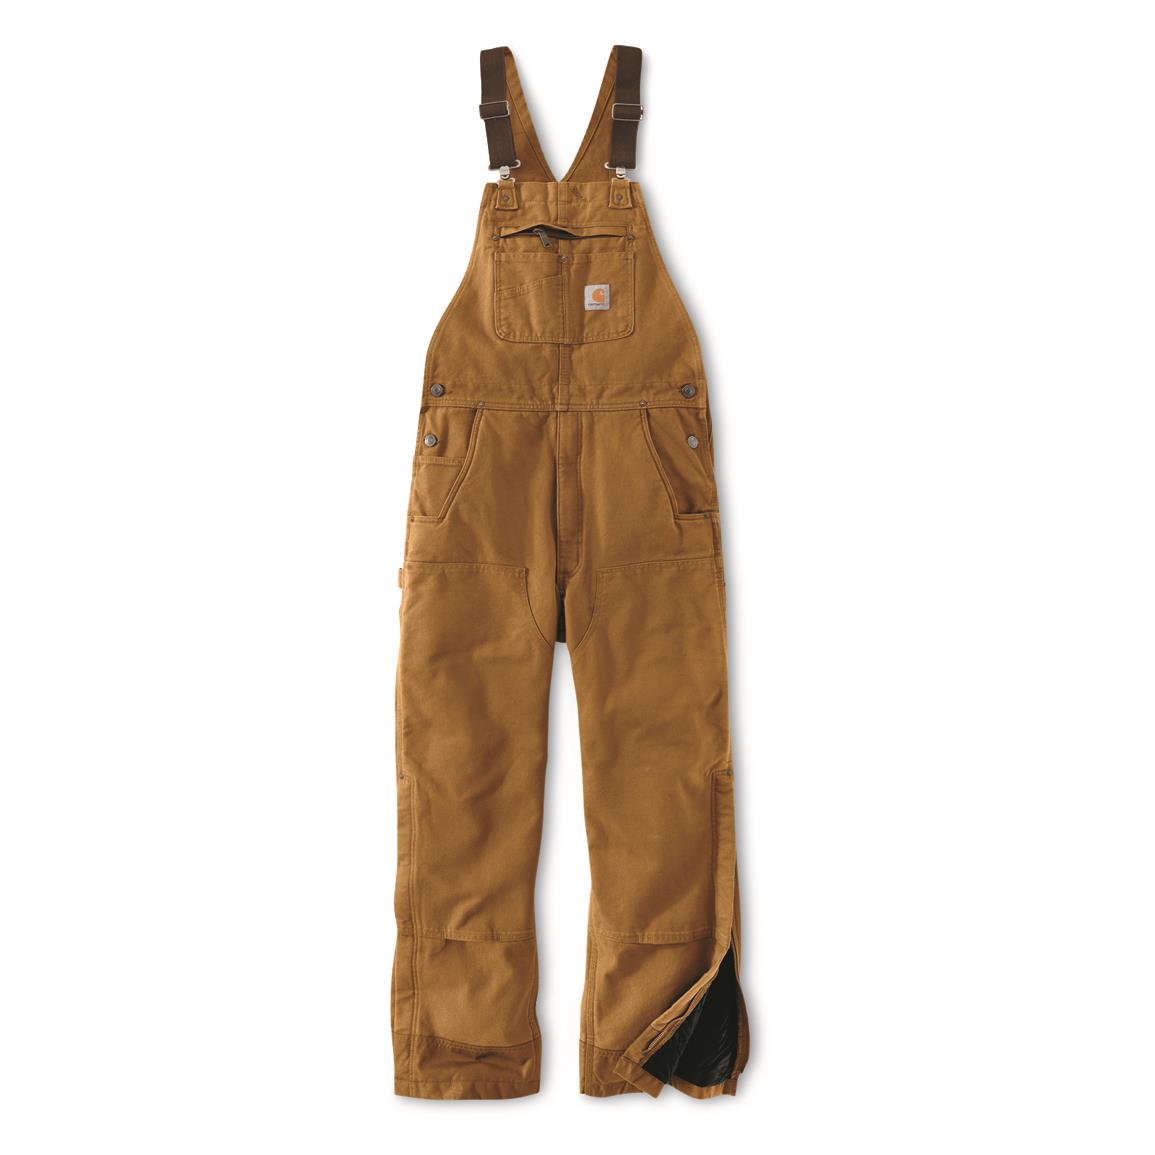 Carhartt Men's Insulated Quilt-lined Washed Duck Bib Overalls, Carhartt® Brown